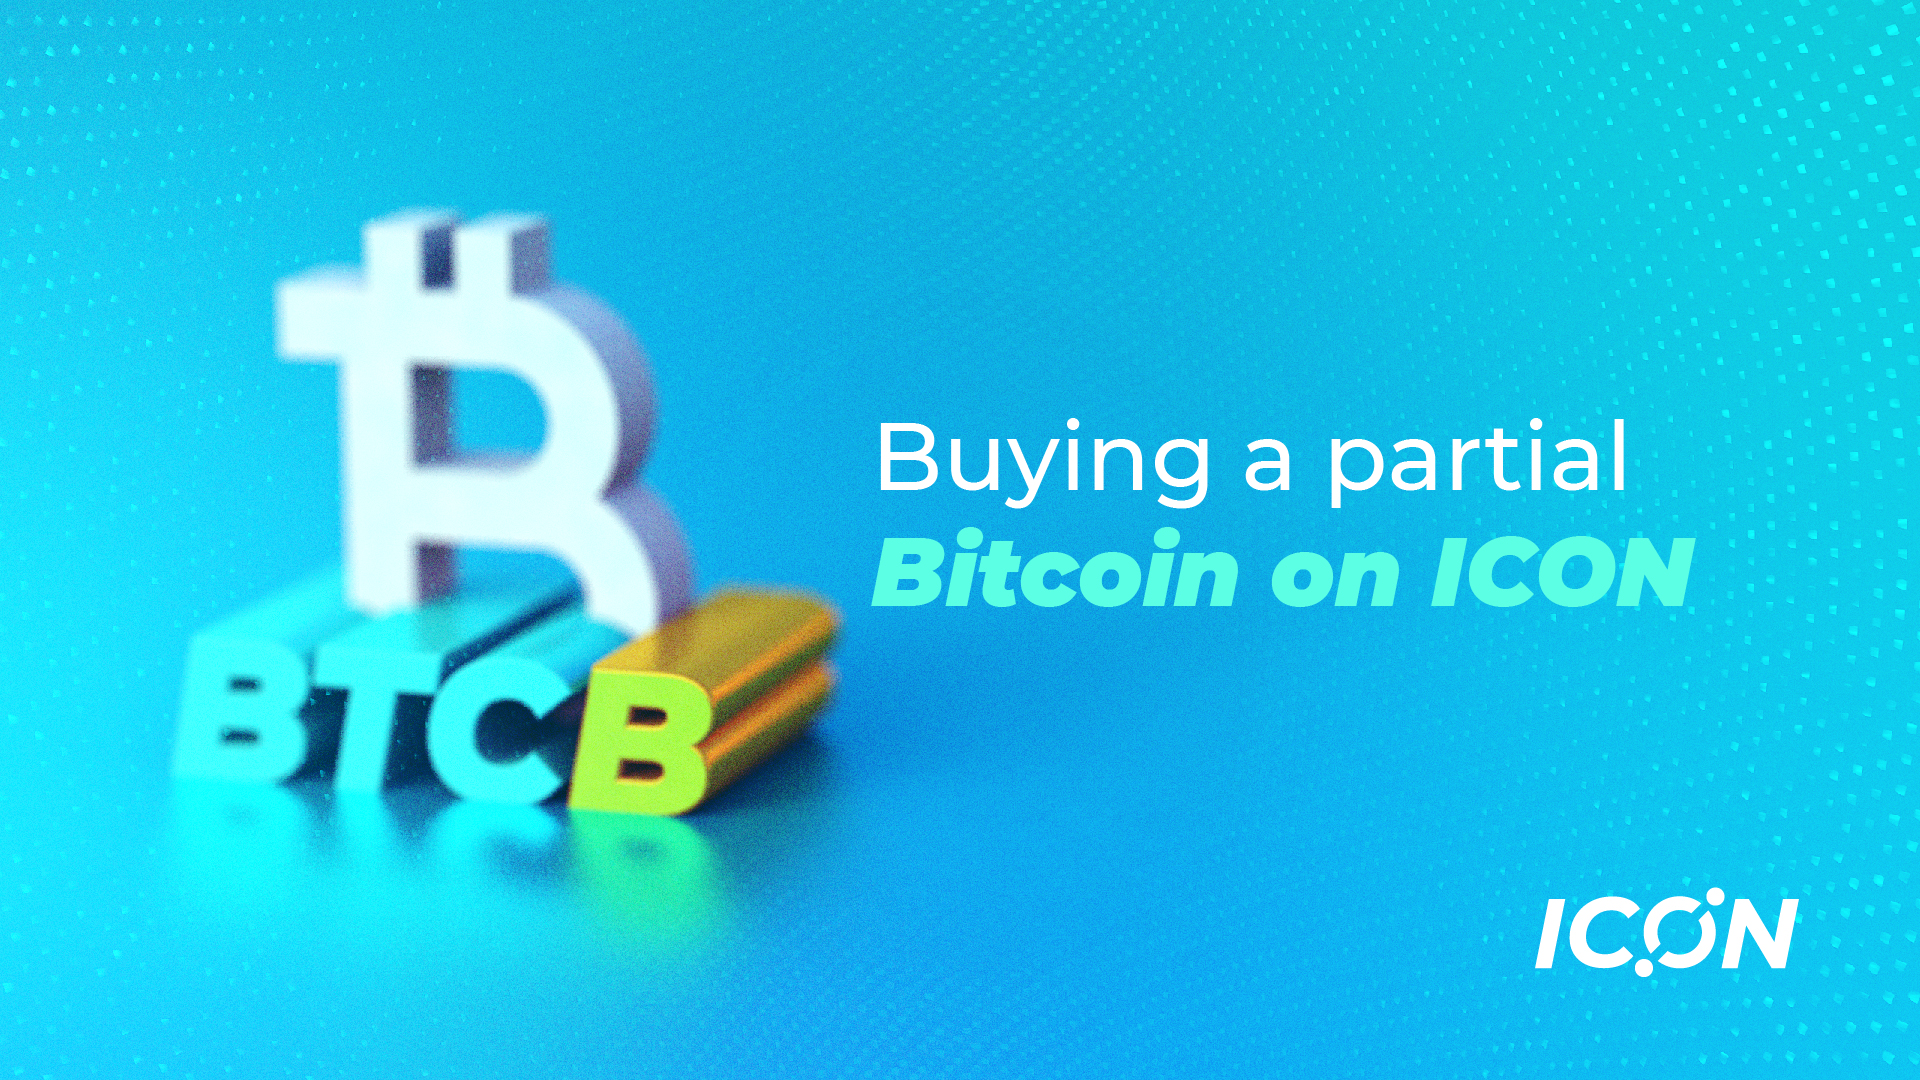 Bitcoin (BTC) has been around for a while, but it is still one of the most popular and talked about cryptocurrencies.